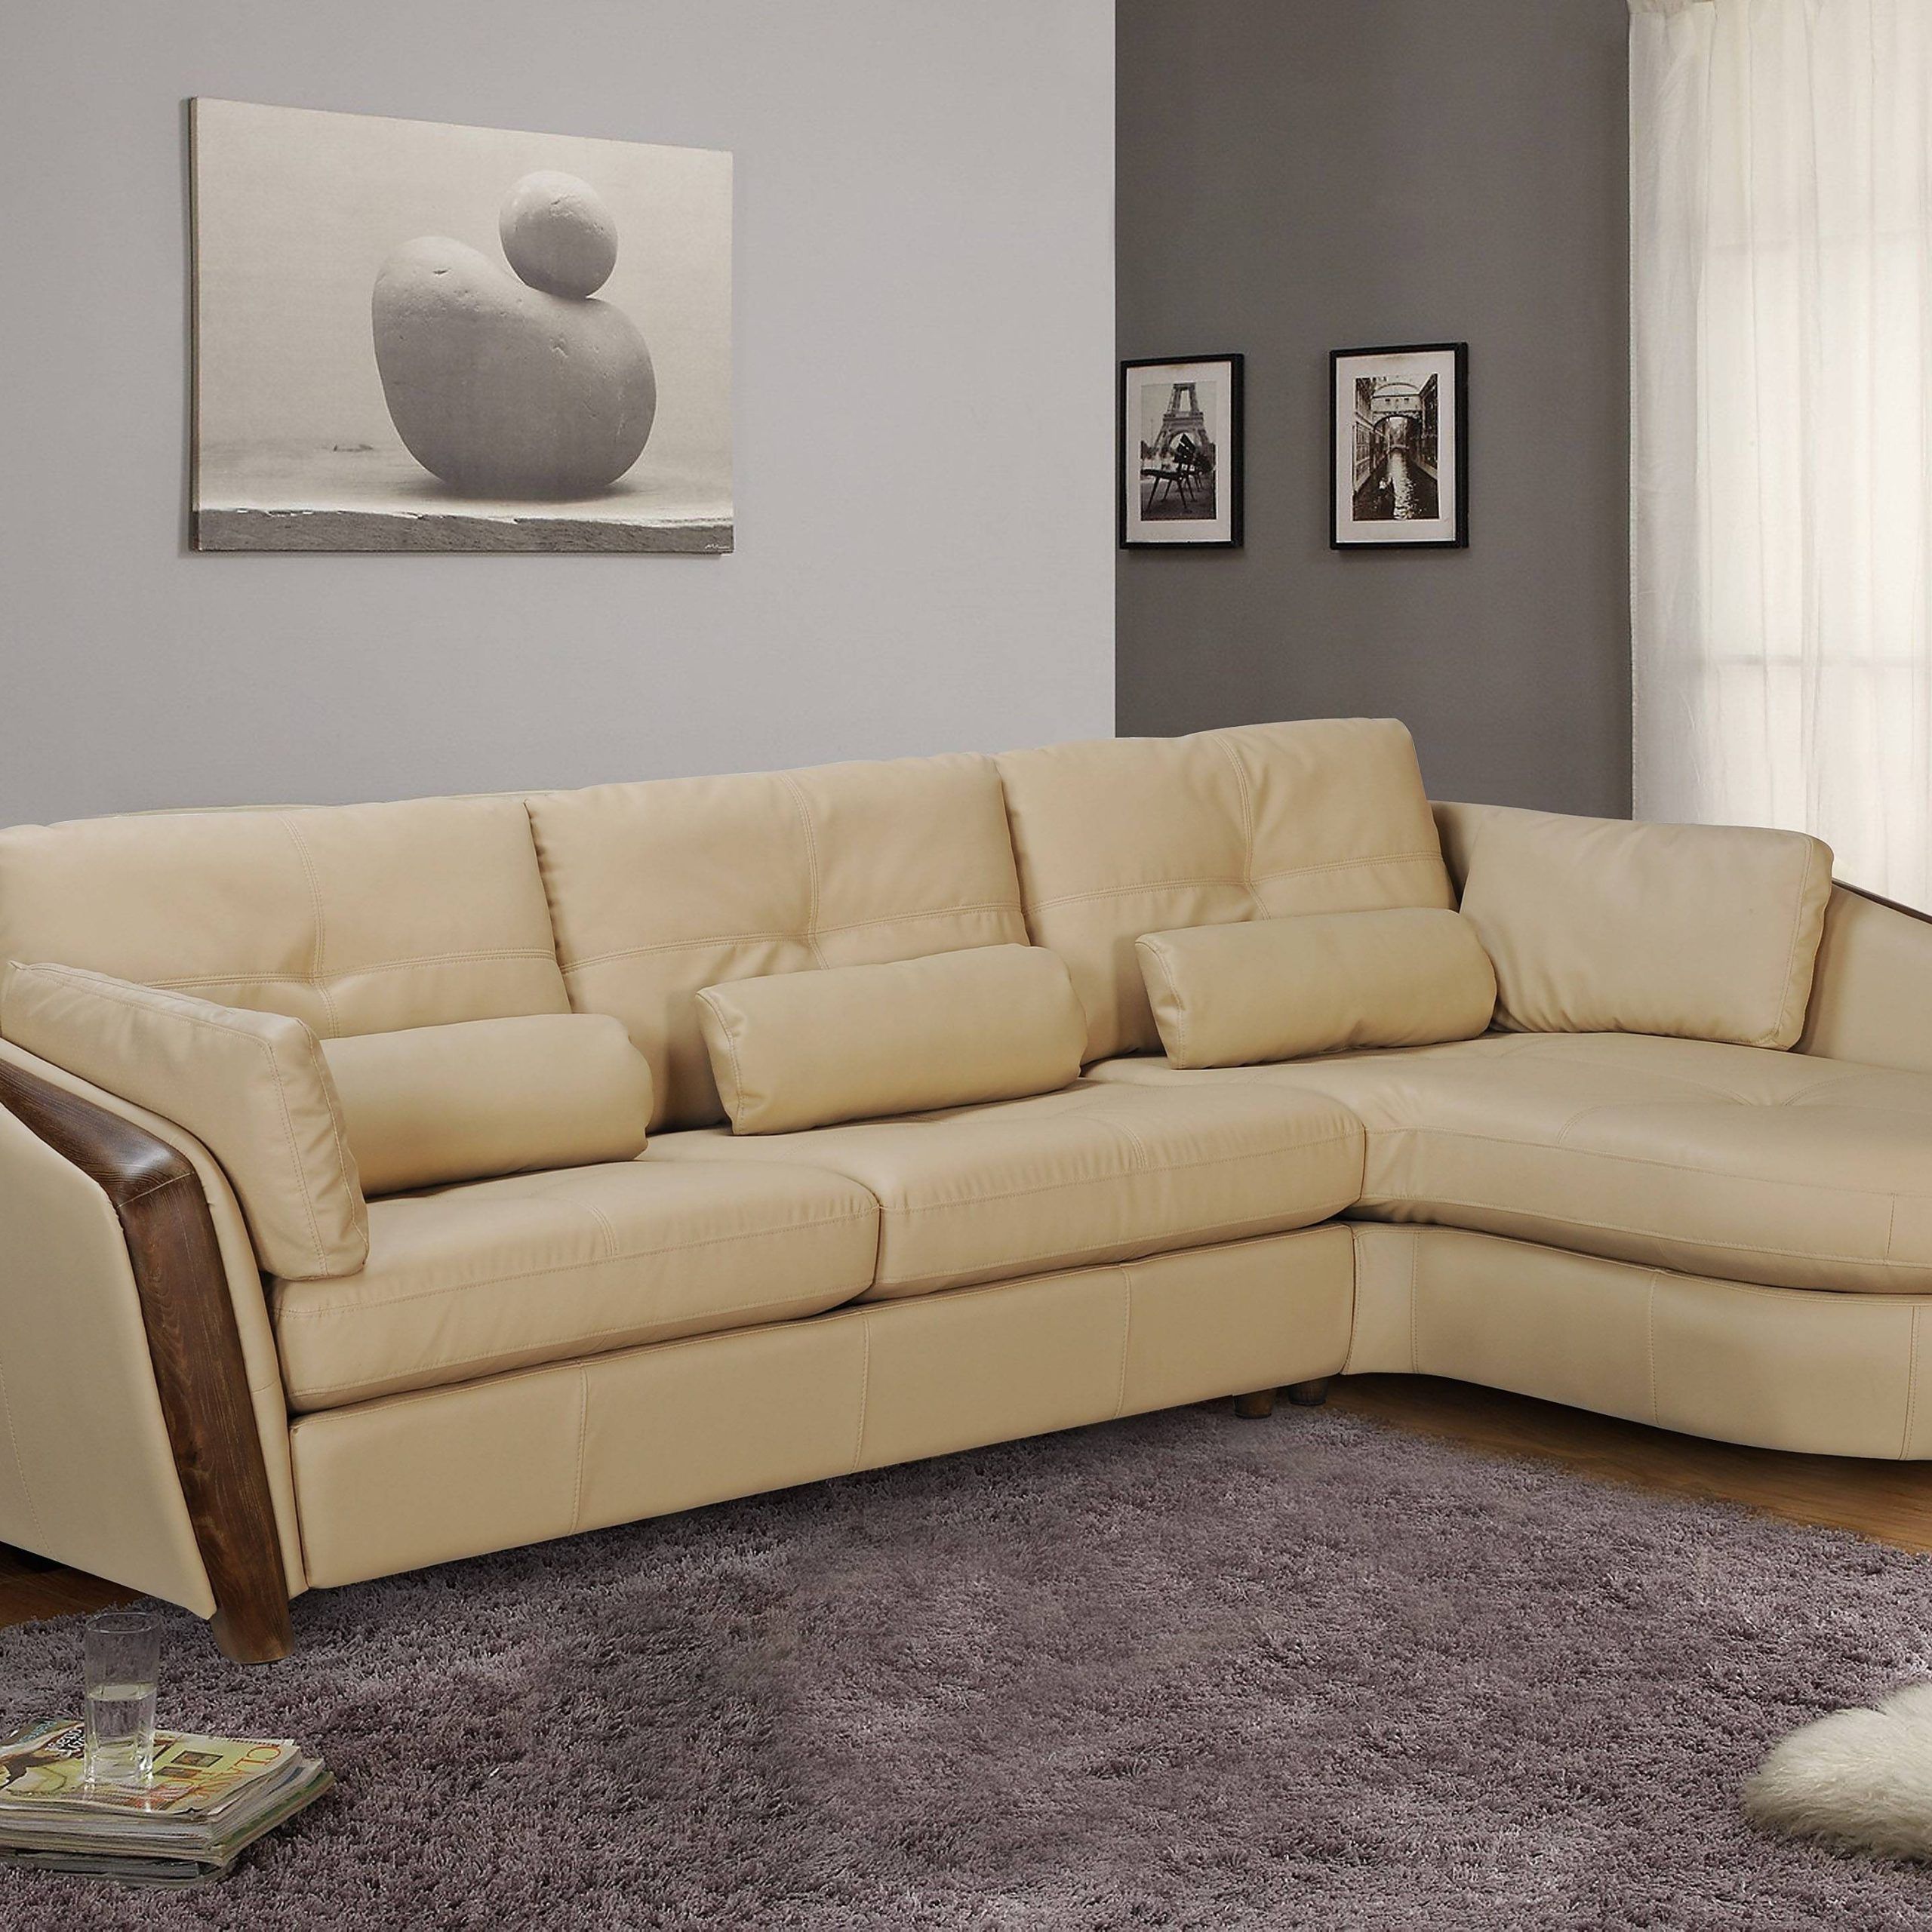 Taupe Bonded Leather Sectional Sofa With Ash Wood Accent Baltimore Maryland  Chont Within 3 Piece Leather Sectional Sofa Sets (View 6 of 15)